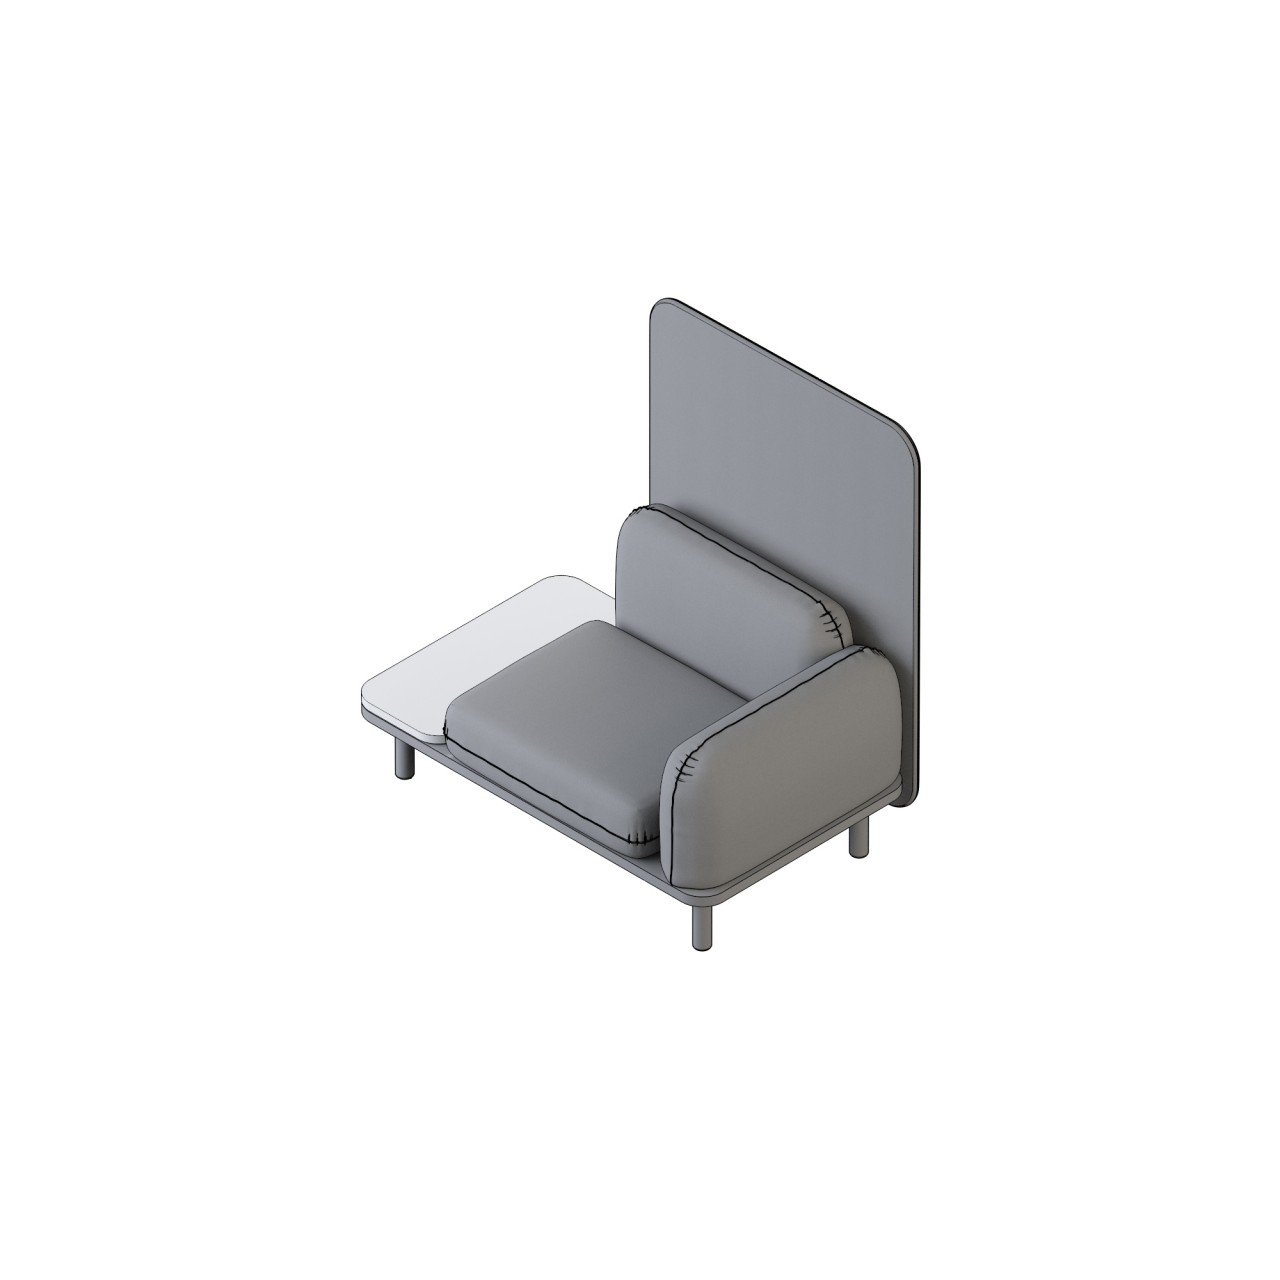 Soft - 24006L-B
left arm privacy
12" right table
COM 9.25
arms 1.25,
back 1.5, base 1.5,
seat 2.5, panel 3